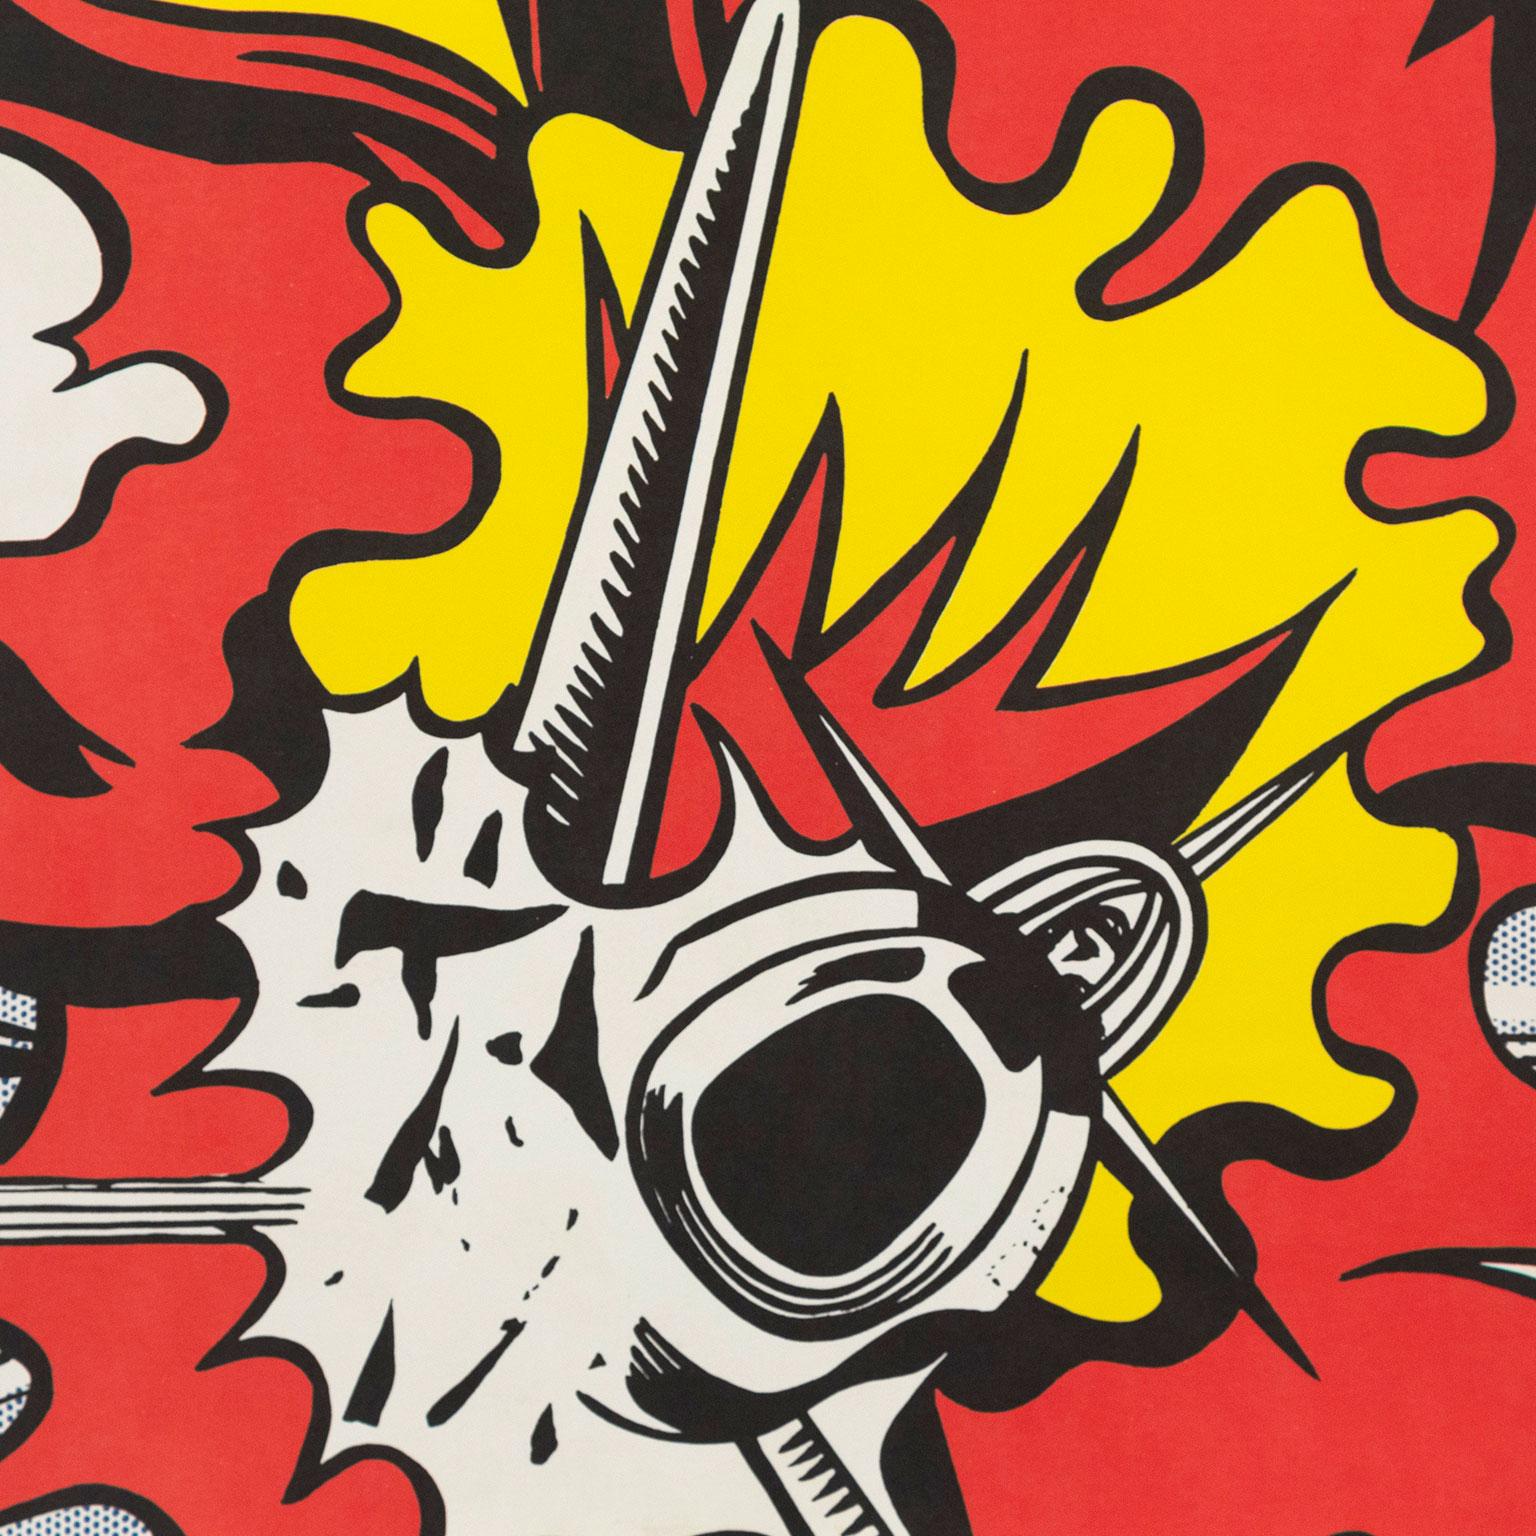 Roy Lichtenstein (1923-1997) was one of the most successful and influential artists of the 20th century, helping pioneer and define Pop Art in the 1960s.

Lichtenstein's signature style mined both images and technique from comic books and